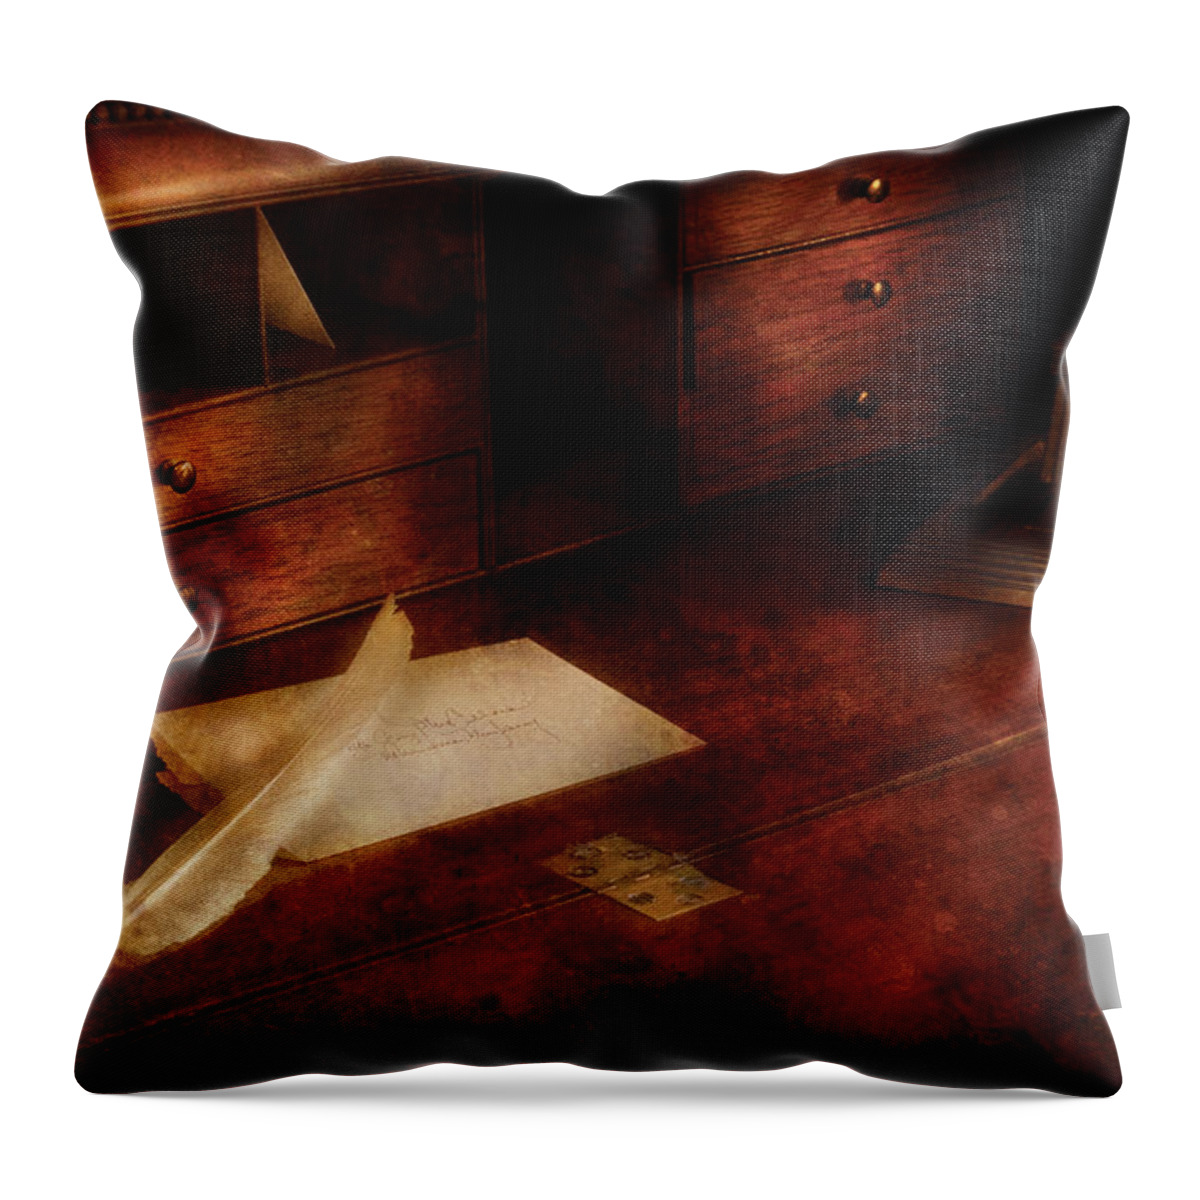 Savad Throw Pillow featuring the photograph Writer - The Writers Desk by Mike Savad